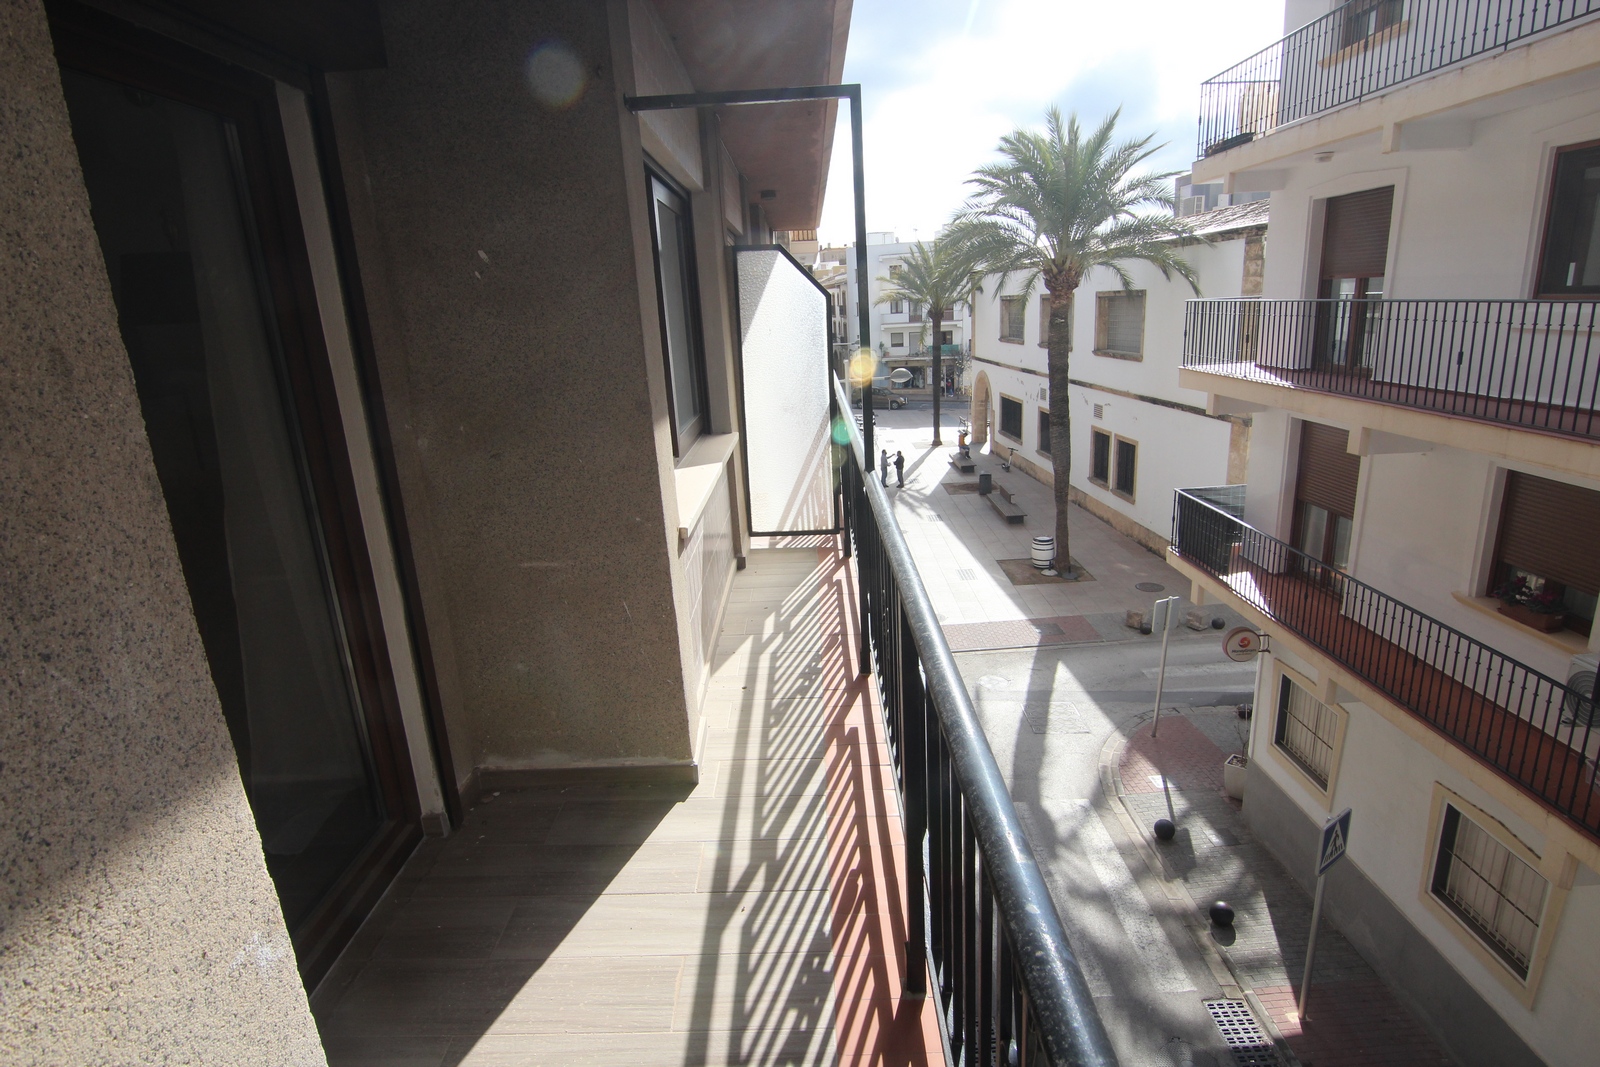 Apartment for sale completely renovated in the center of Jávea.